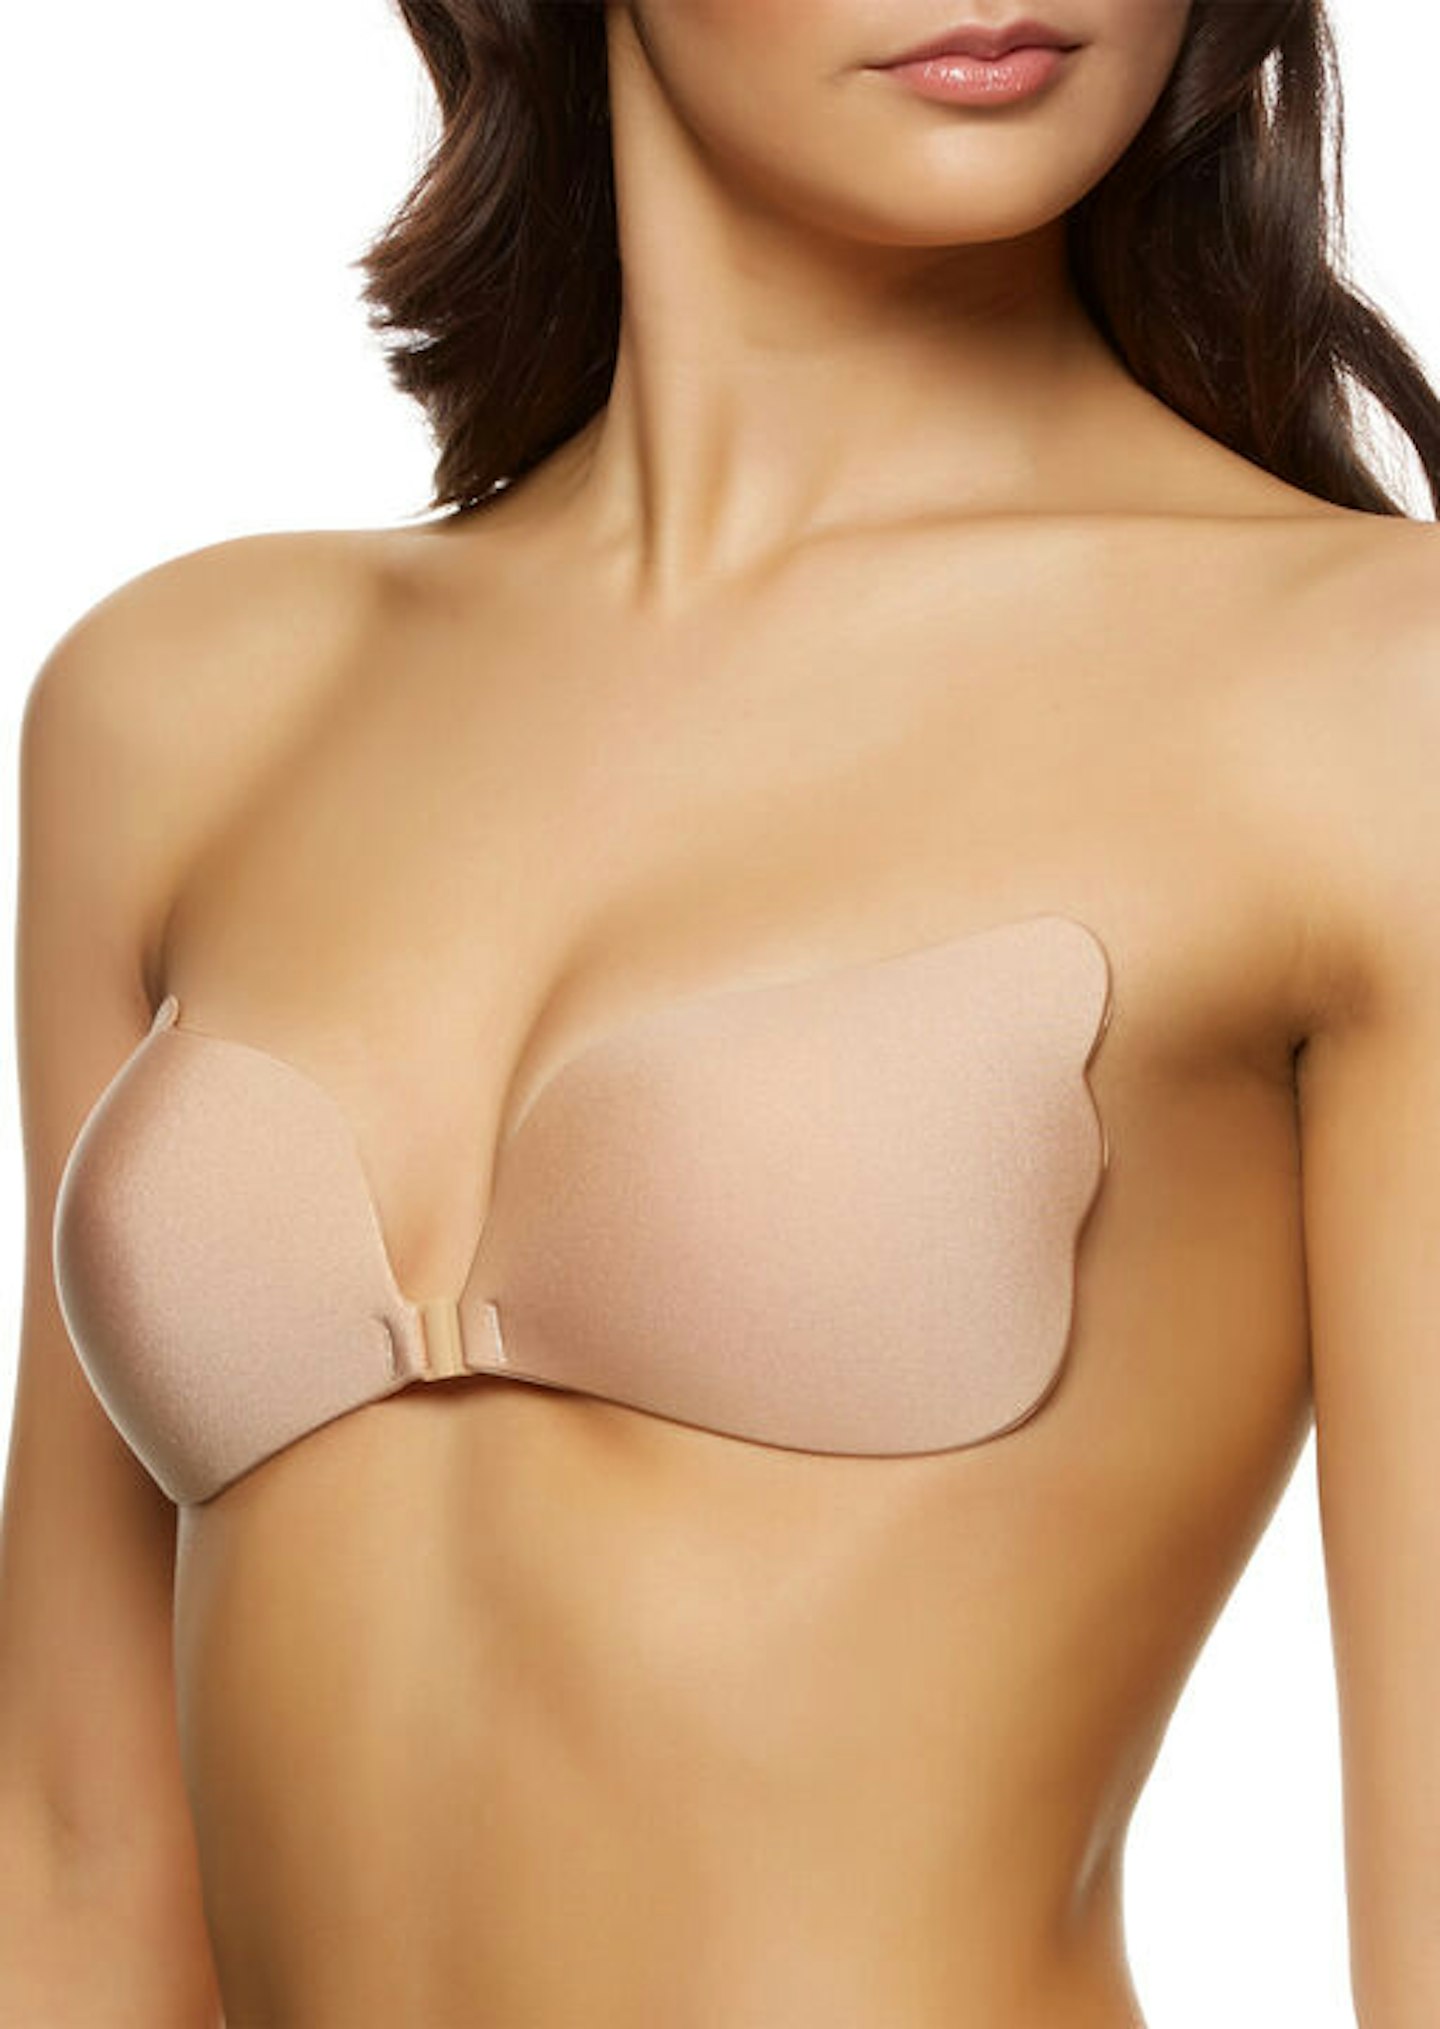 Spencer Women's Strapless Push Up Invisible Sticky Bra Silicone Reusable  Self Adhesive Backless Bra for Dress Halter Beige,B Cup